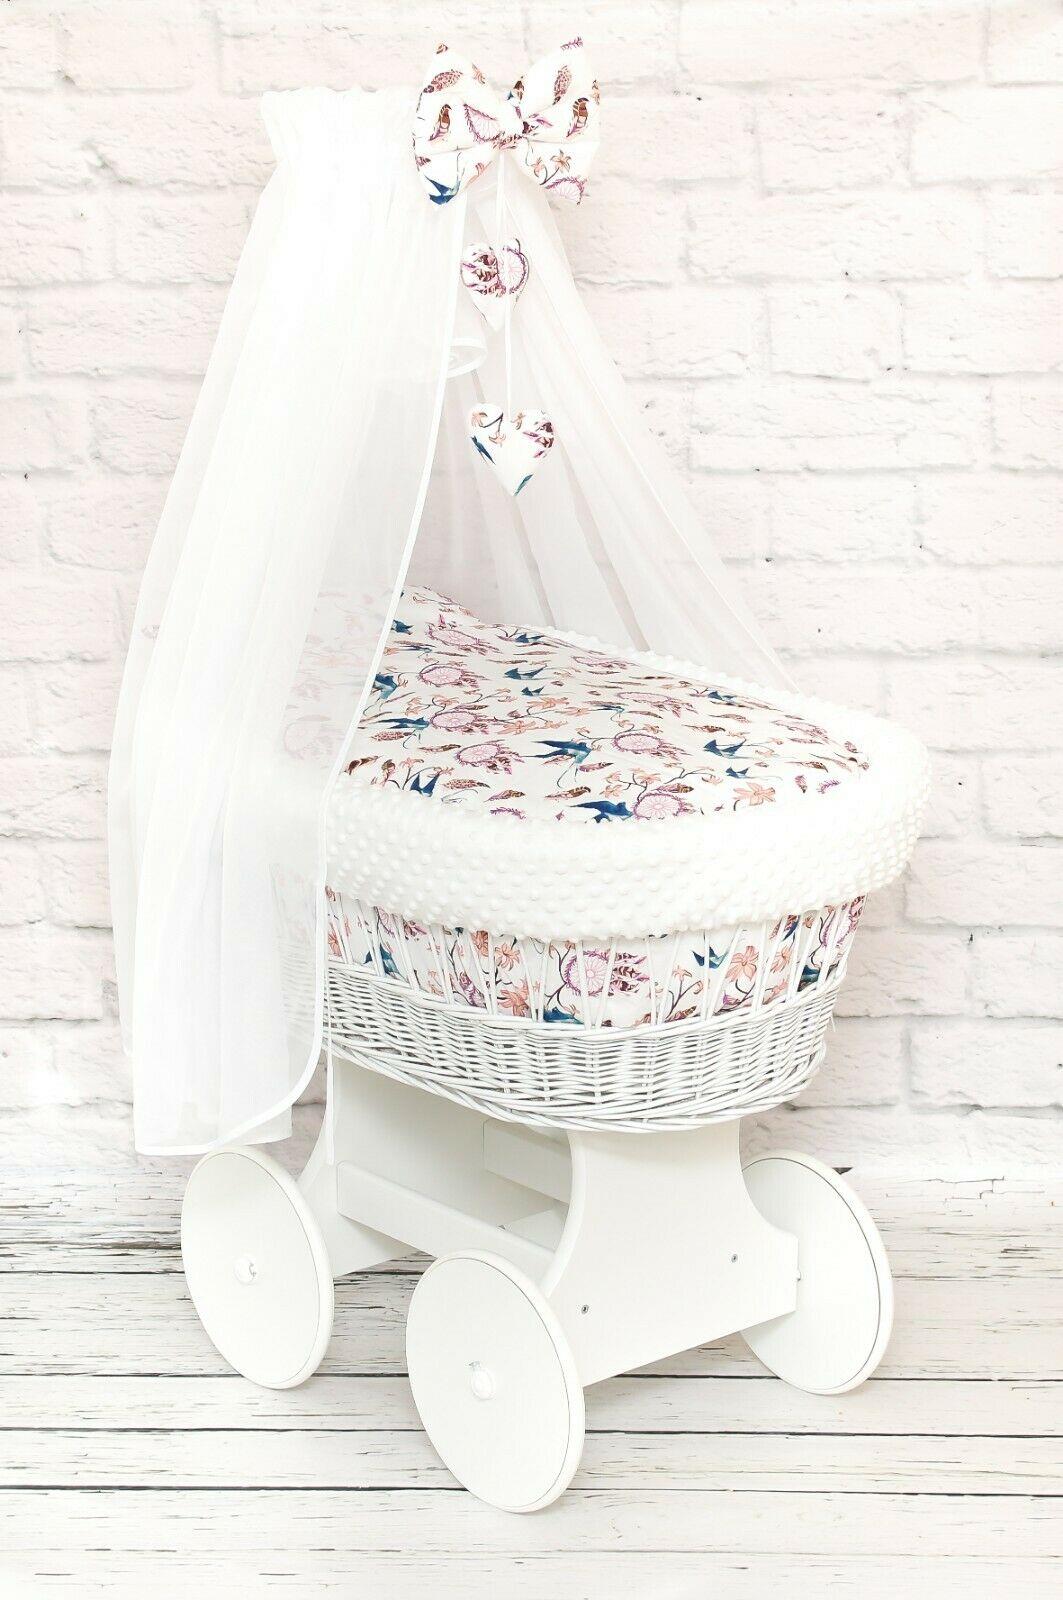 Full Bedding Set With Canopy To Fit Wicker Moses Basket Dream Catcher Birds - White Dimple